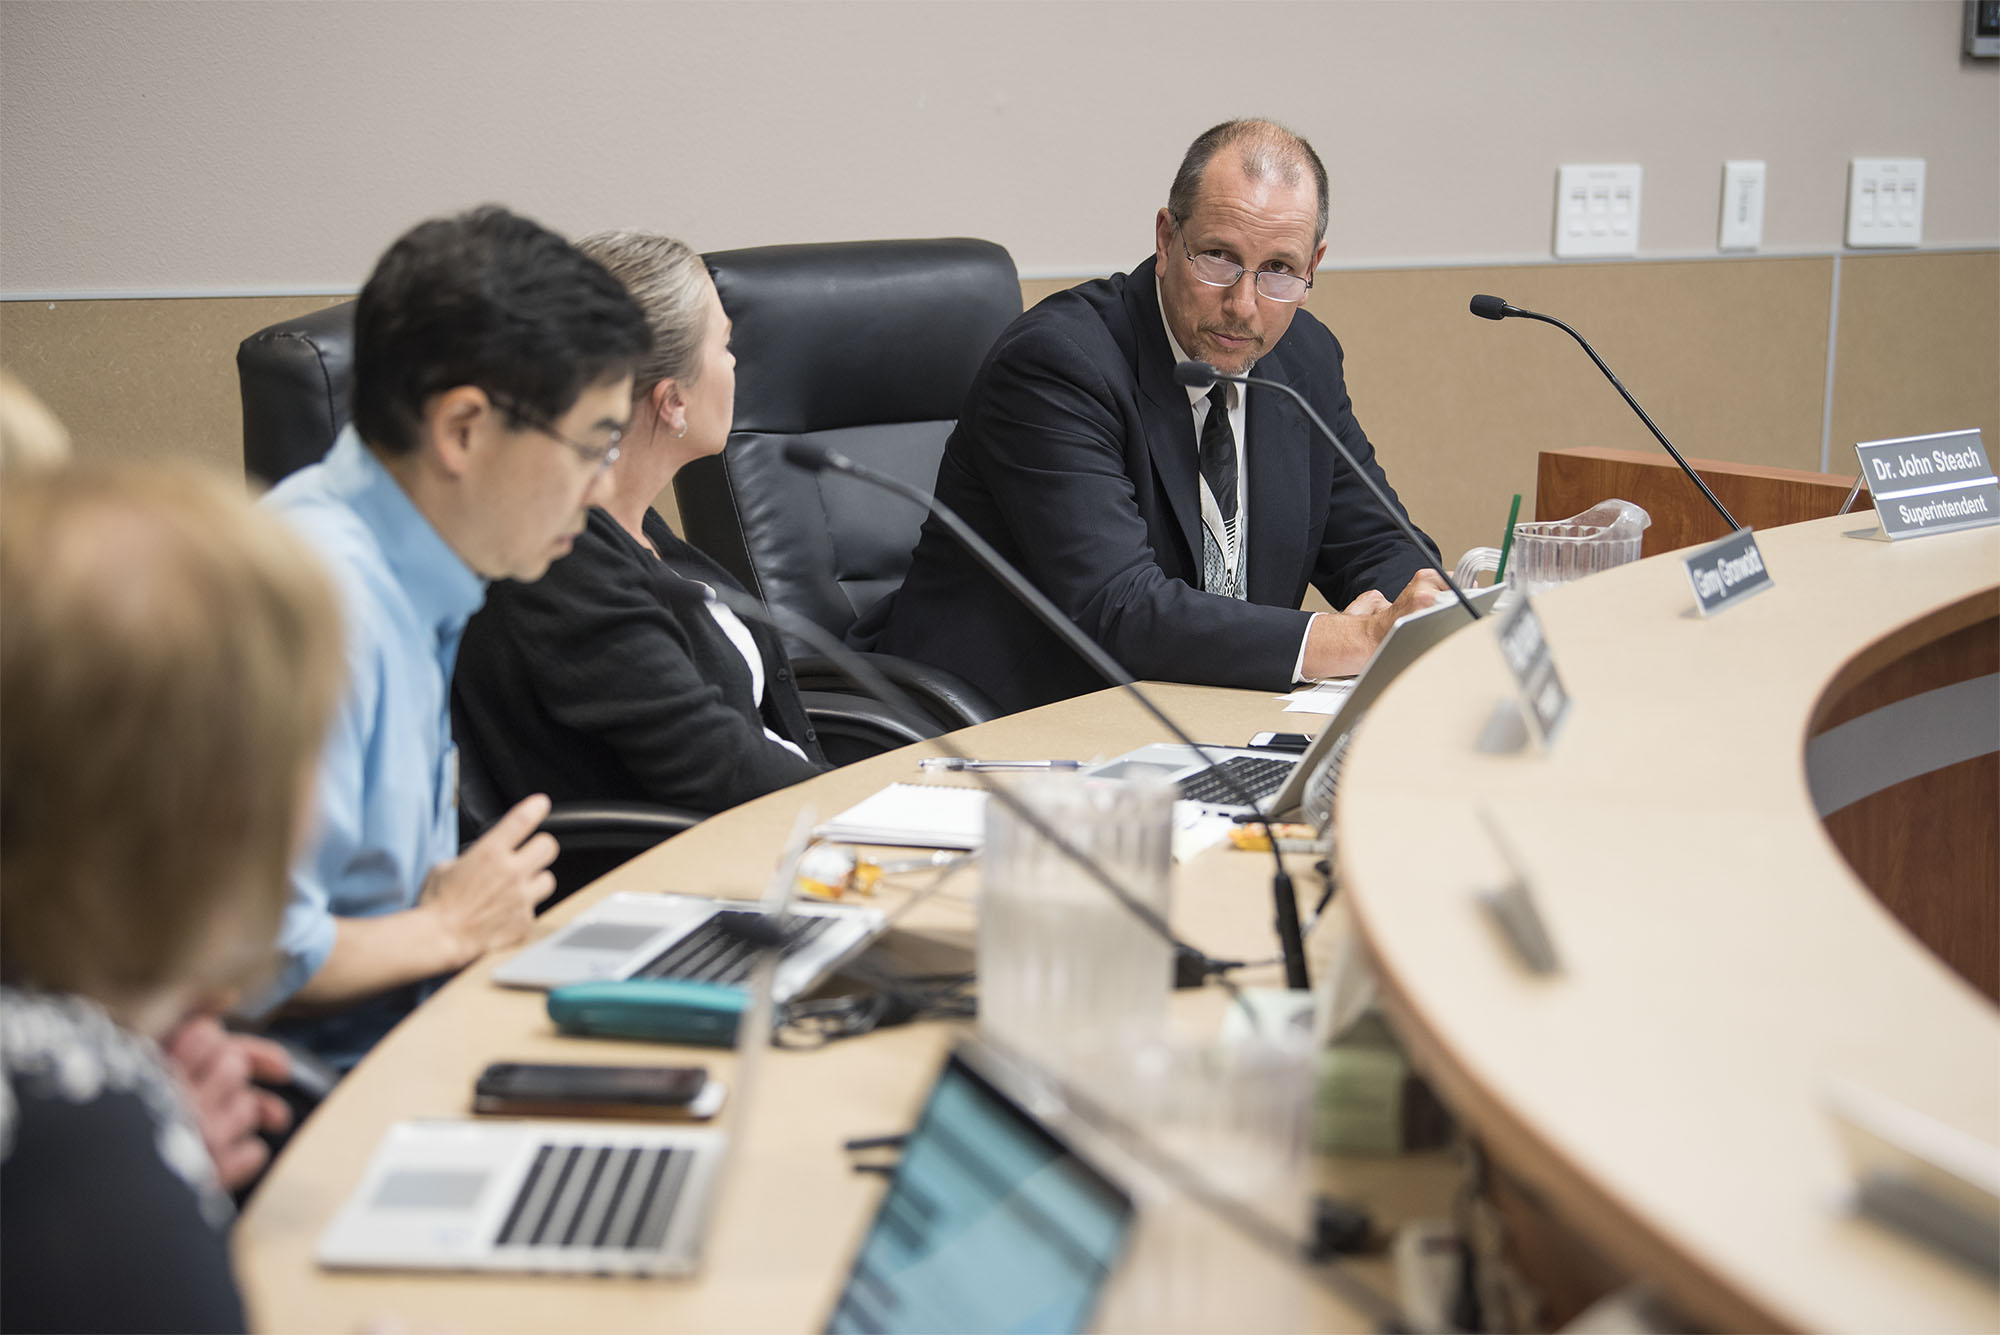 The Evergreen School Board plans to submit a levy request to voters, including a technology levy. At right is John Steach, Evergreen Public Schools superintendent.